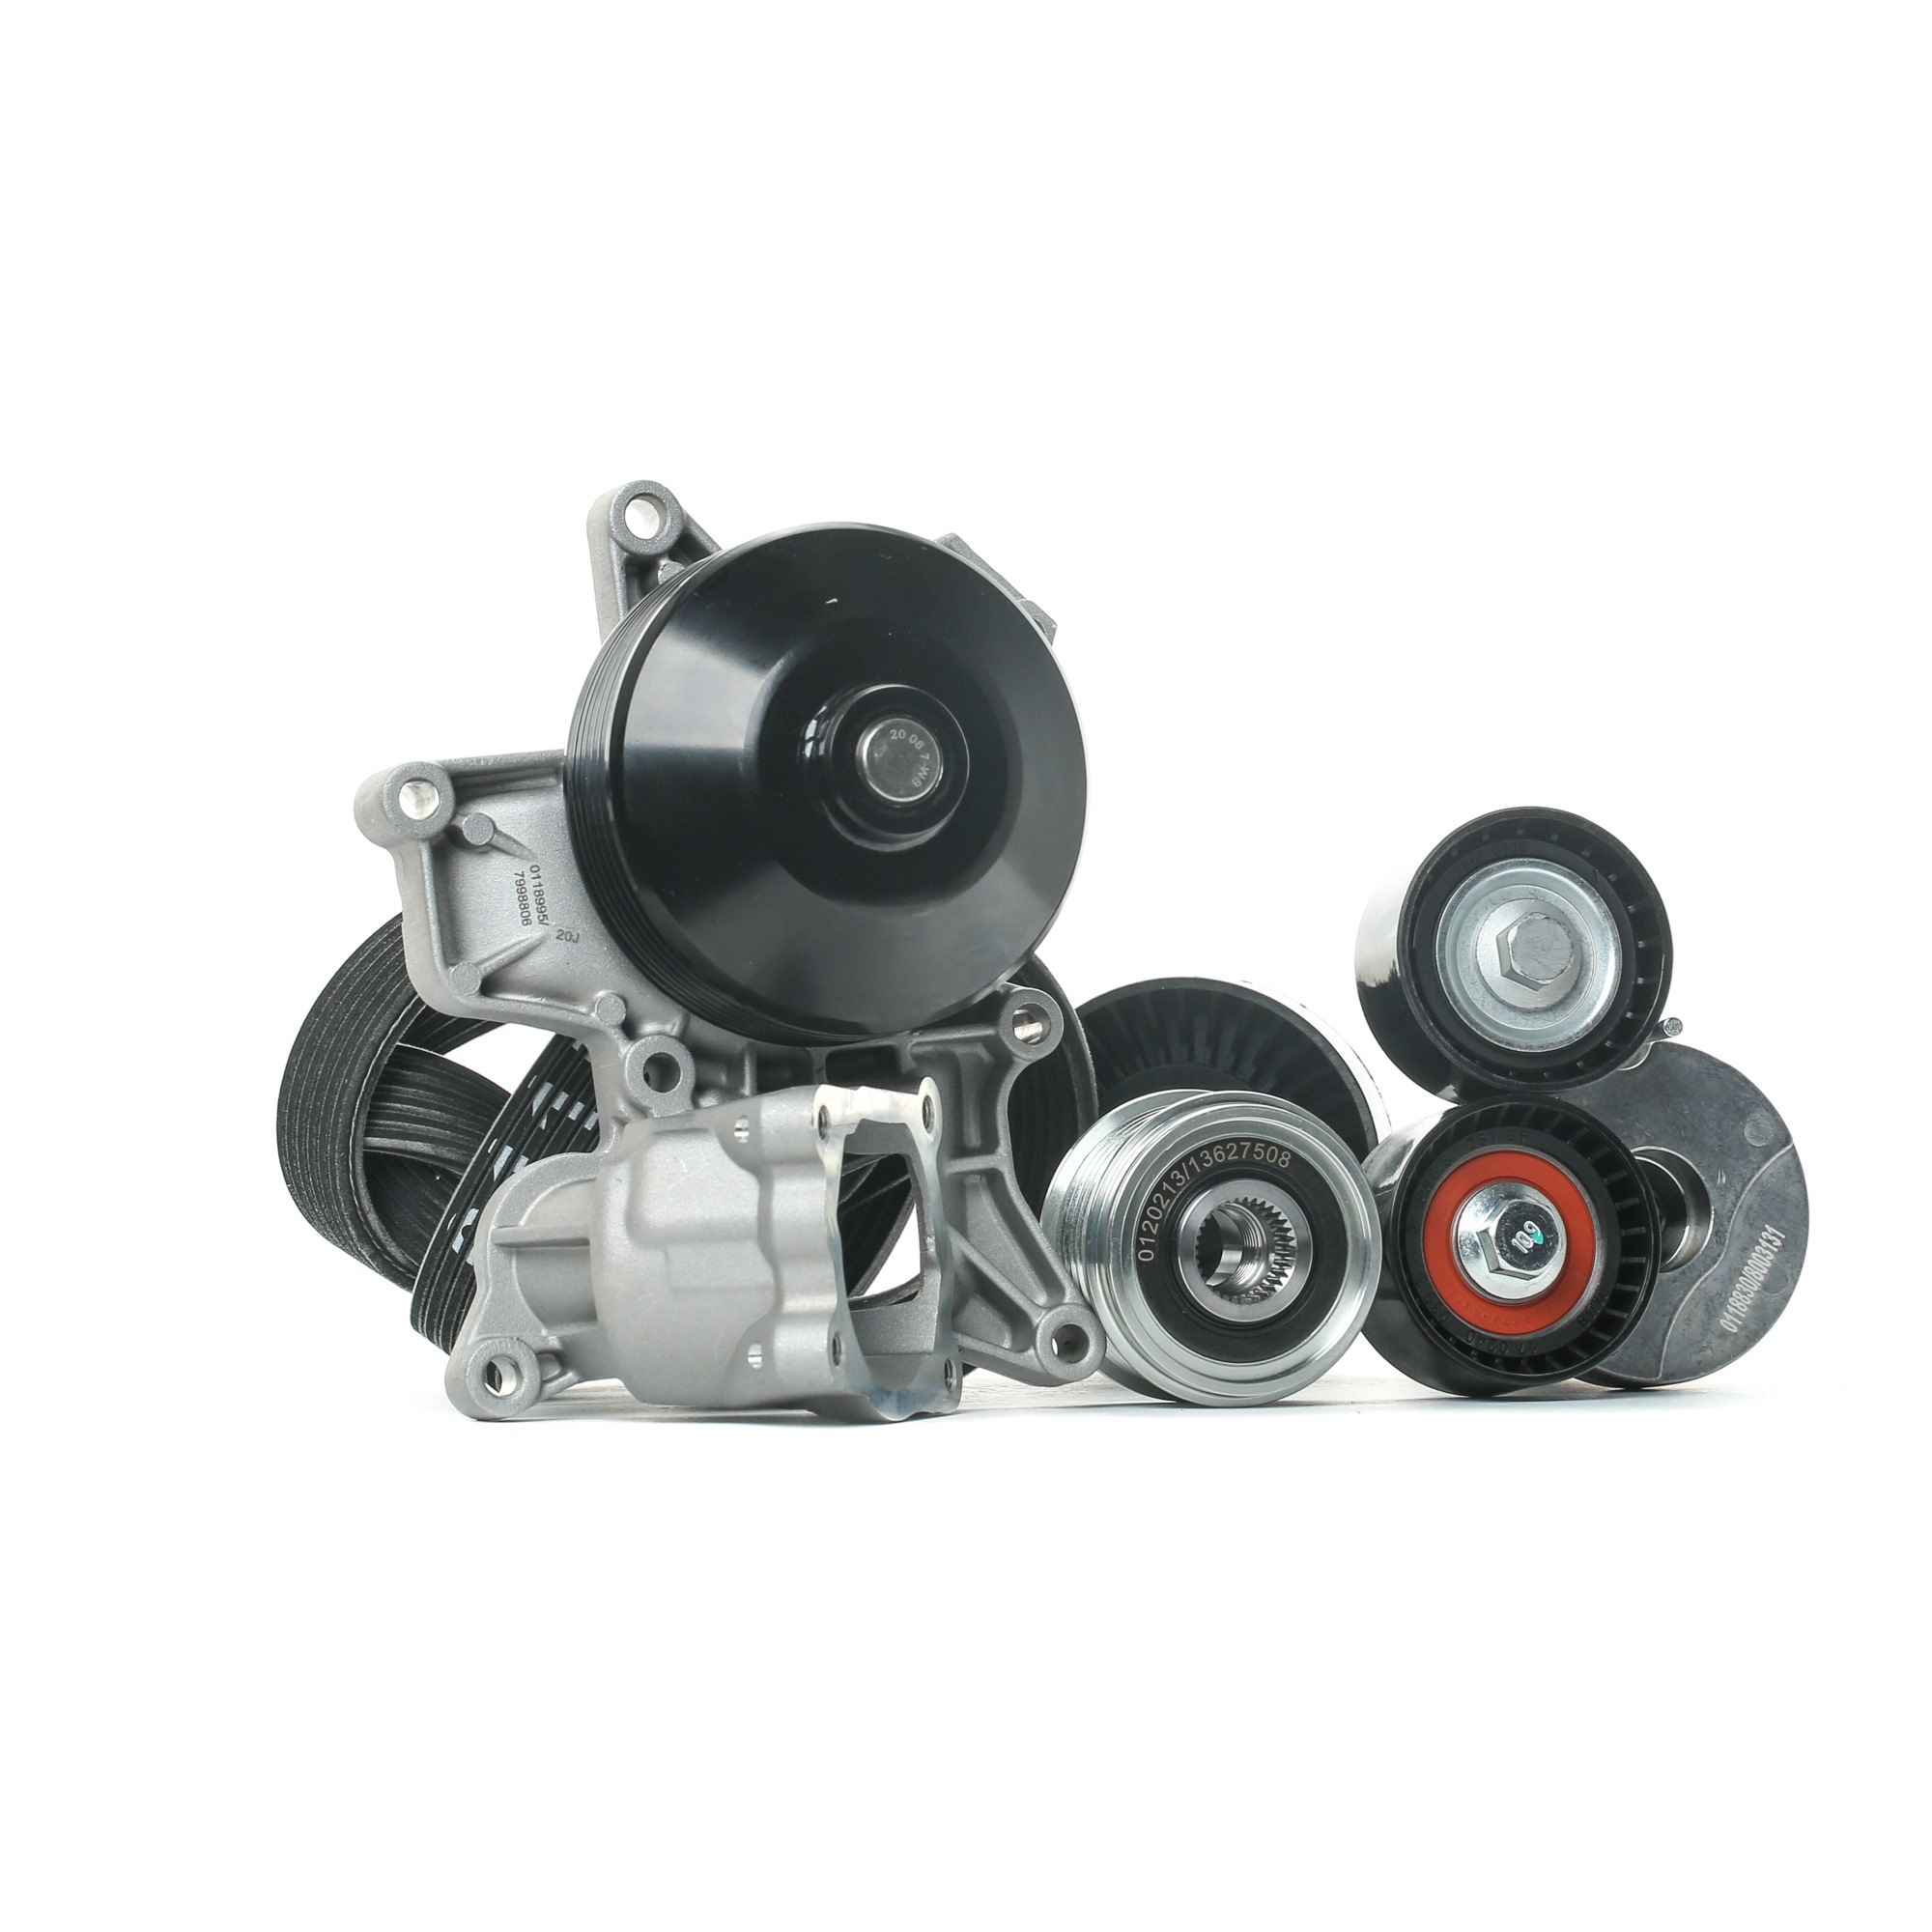 STARK SKPRB-5160009 Water Pump + V-Ribbed Belt Kit with water pump, Check alternator freewheel clutch & replace if necessary